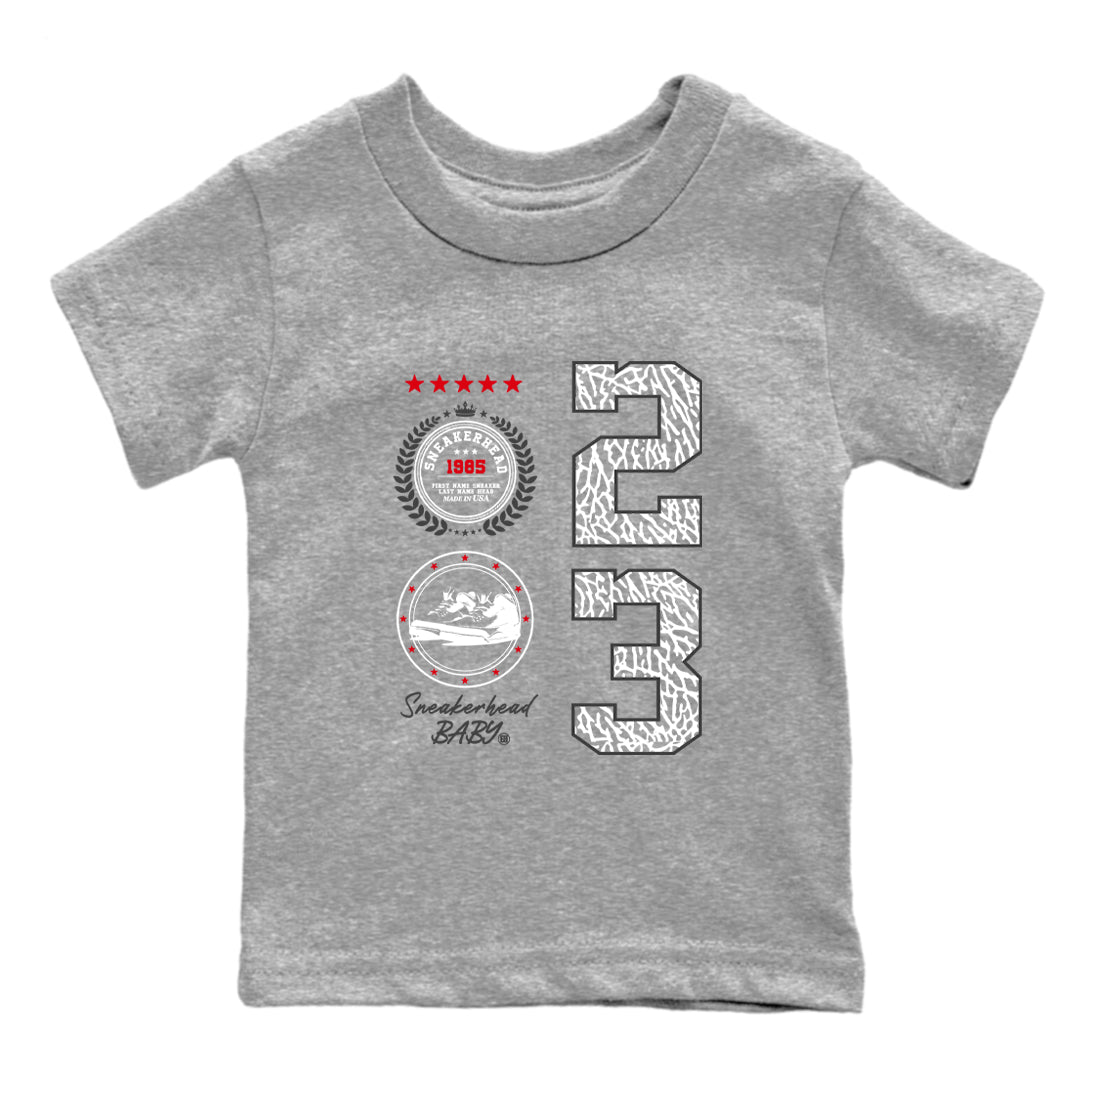 Air Jordan 3 Retro Cement Grey shirts to match jordans Sneaker Emblem sneaker match tees 3s Cement Grey SNRT Sneaker Tees streetwear brand Baby and Youth Heather Grey 2 cotton tee